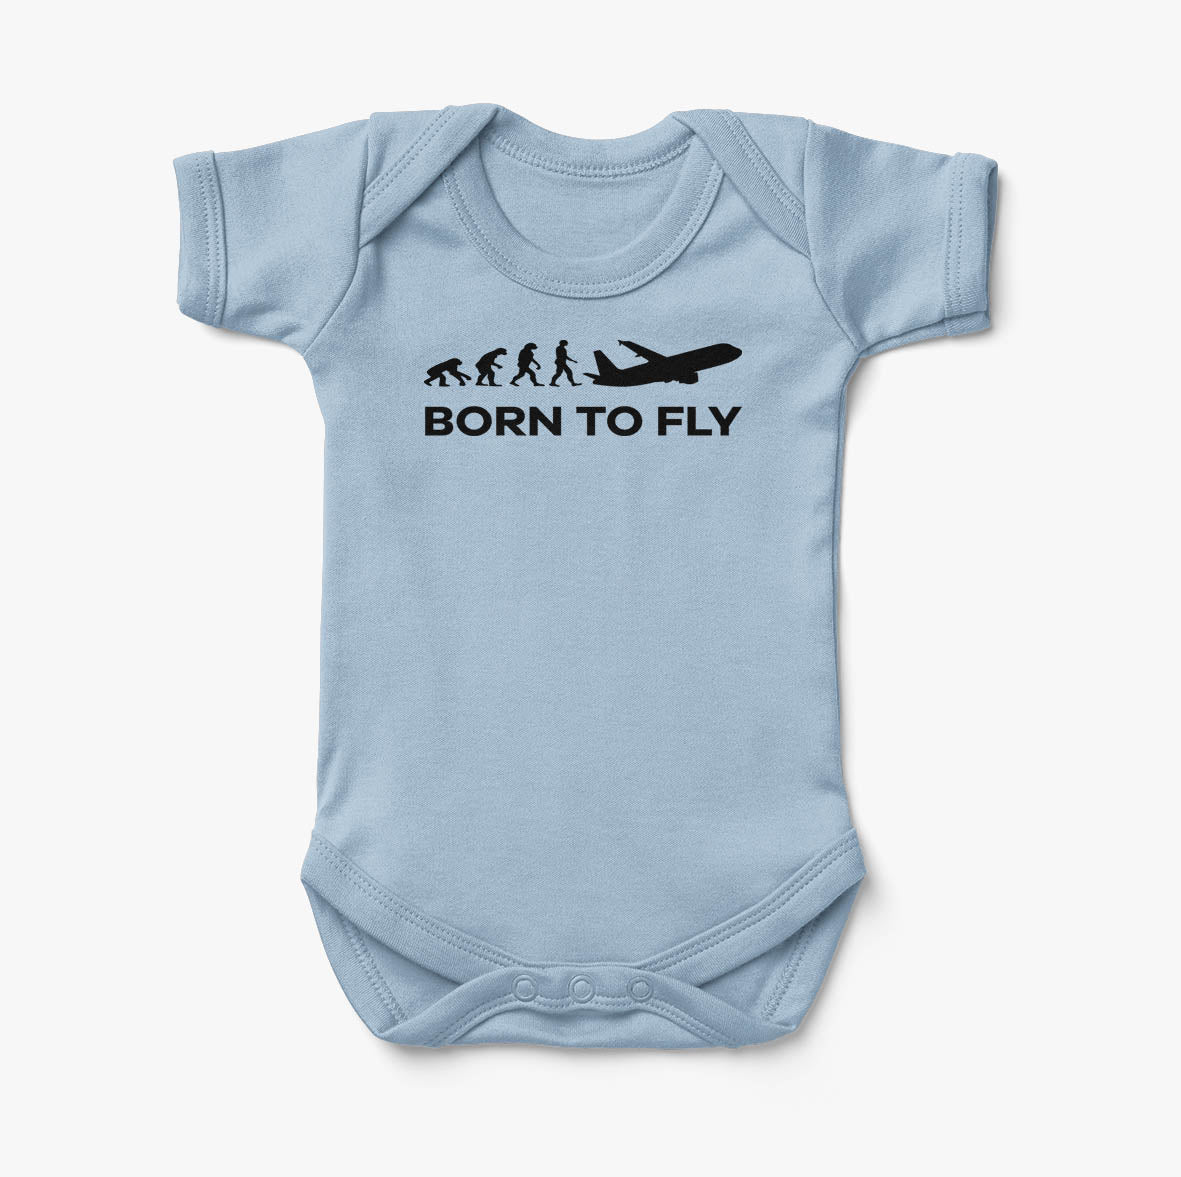 Born To Fly Designed Baby Bodysuits